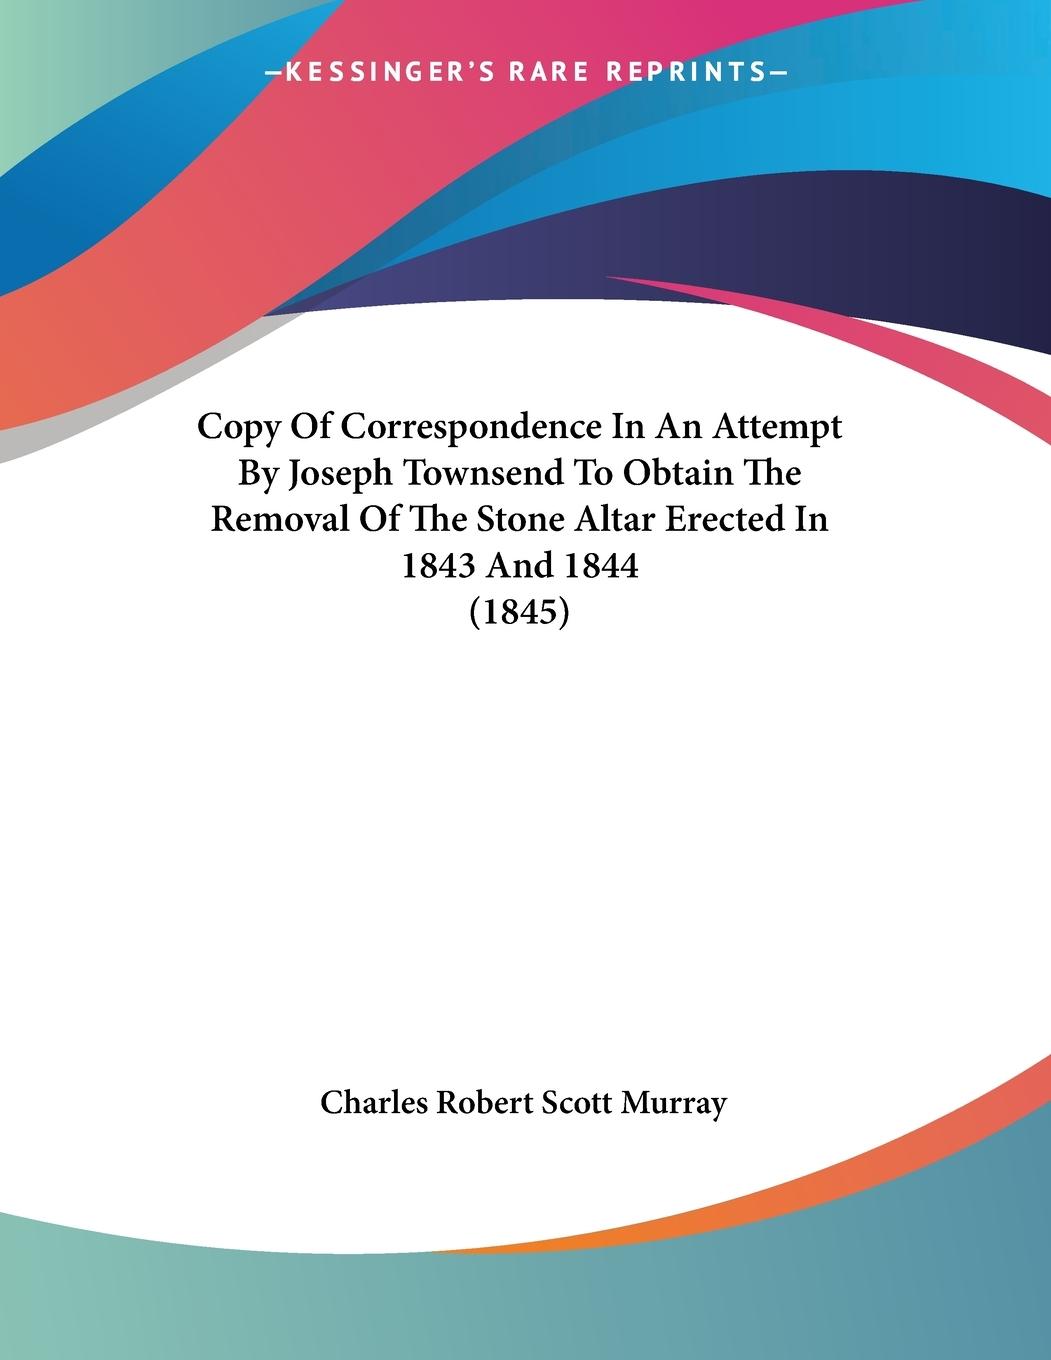 Copy Of Correspondence In An Attempt By Joseph Townsend To Obtain The Removal Of The Stone Altar Erected In 1843 And 1844 (1845) - Murray, Charles Robert Scott